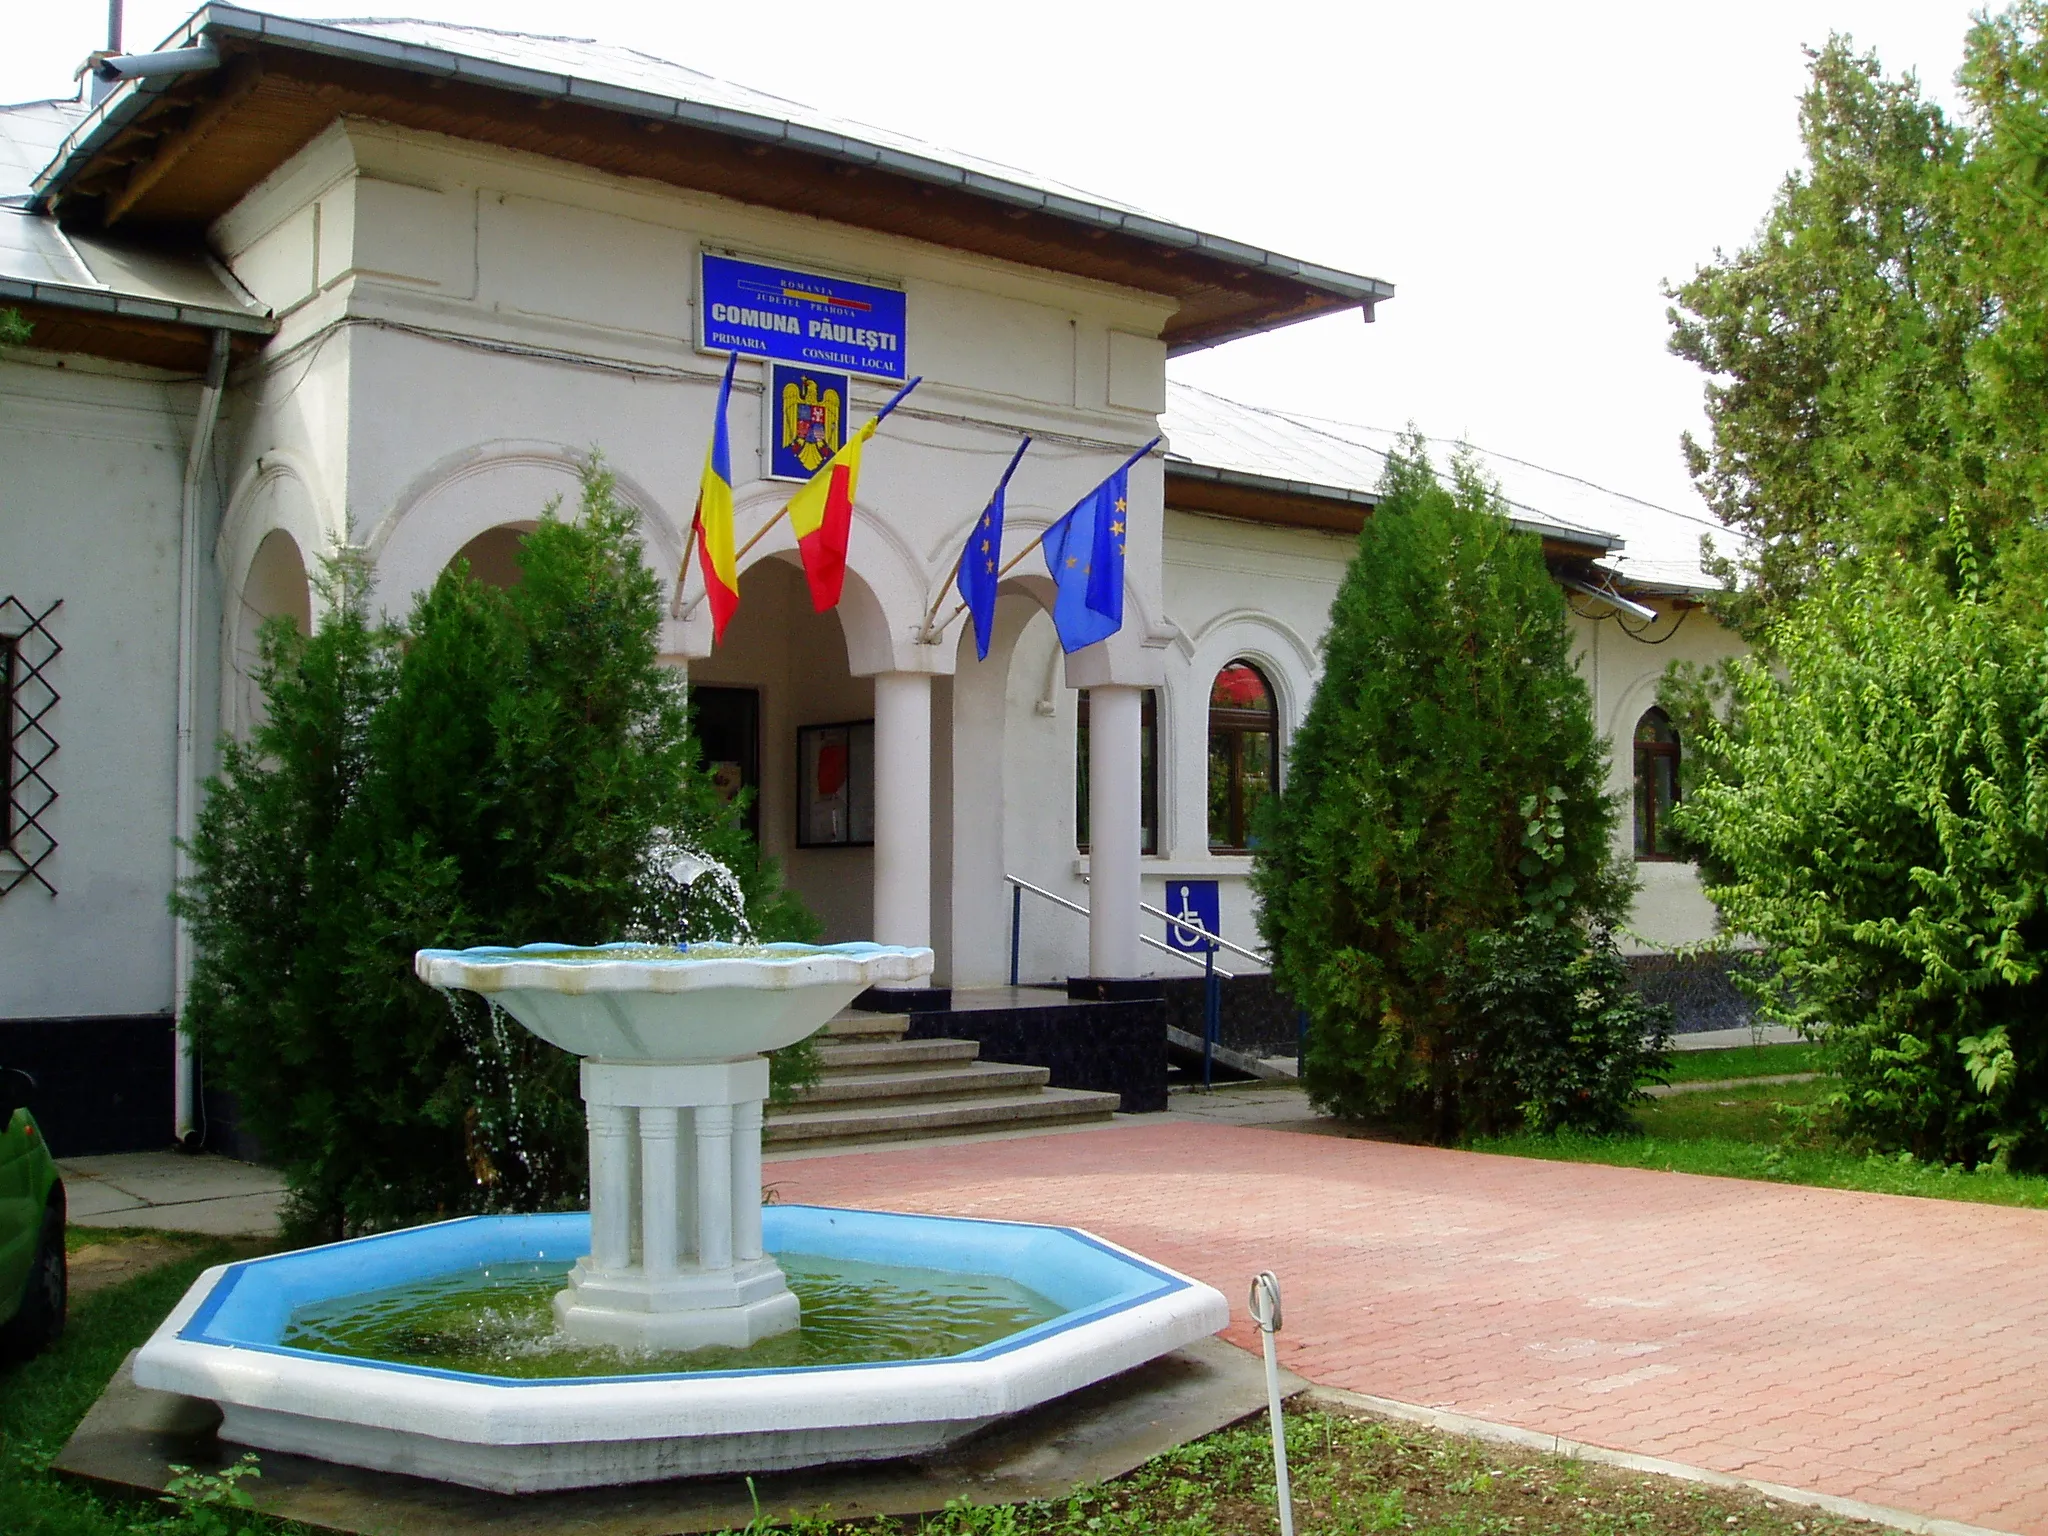 Photo showing: Town Hall of Pauleşti, Judeţul Prahova, Romania.
Architect: Toma T. Socolescu. 
This building has been done between 1938 and 1939.

We are the only heirs and descendants of Toma T. Socolescu (died in 1960 in Bucharest) and therefore owner of all his intellectual rights.